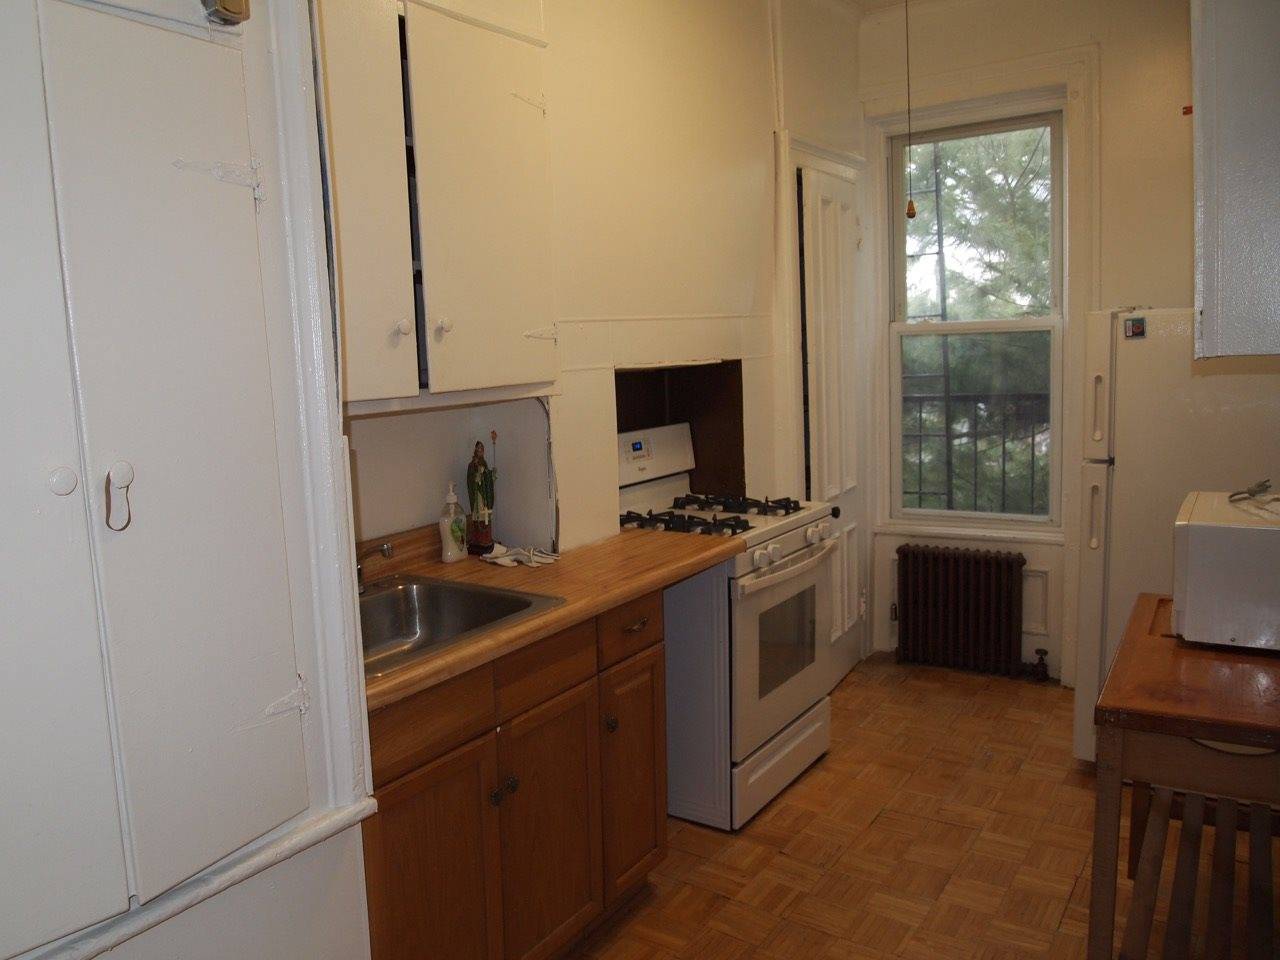 Two bedroom apartment with 2 dens and 1 full bath available in great Heights location